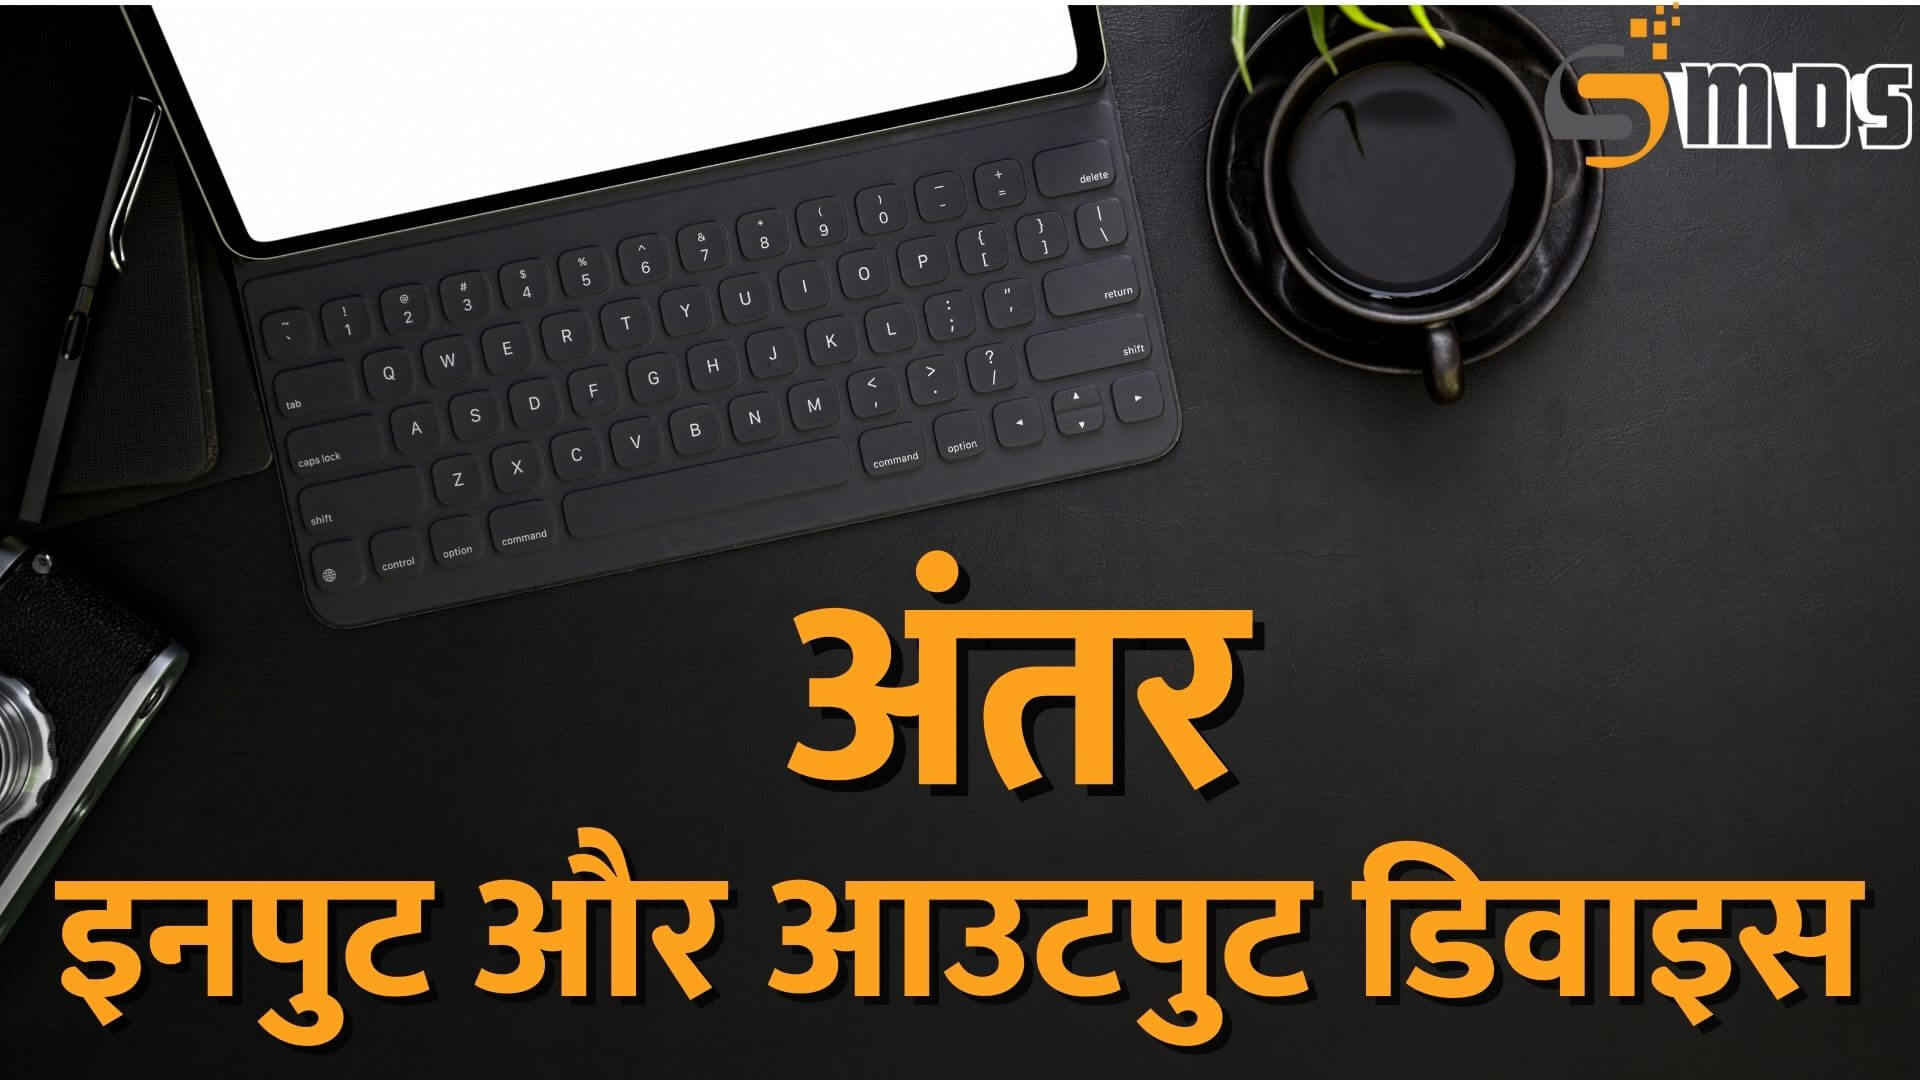 इनपुट और आउटपुट डिवाइस में अंतर - difference between input and output devices in Hindi, आउटपुट डिवाइस क्या है - What is output device in Hindi, इनपुट डिवाइस क्या है - What is input device in Hindi